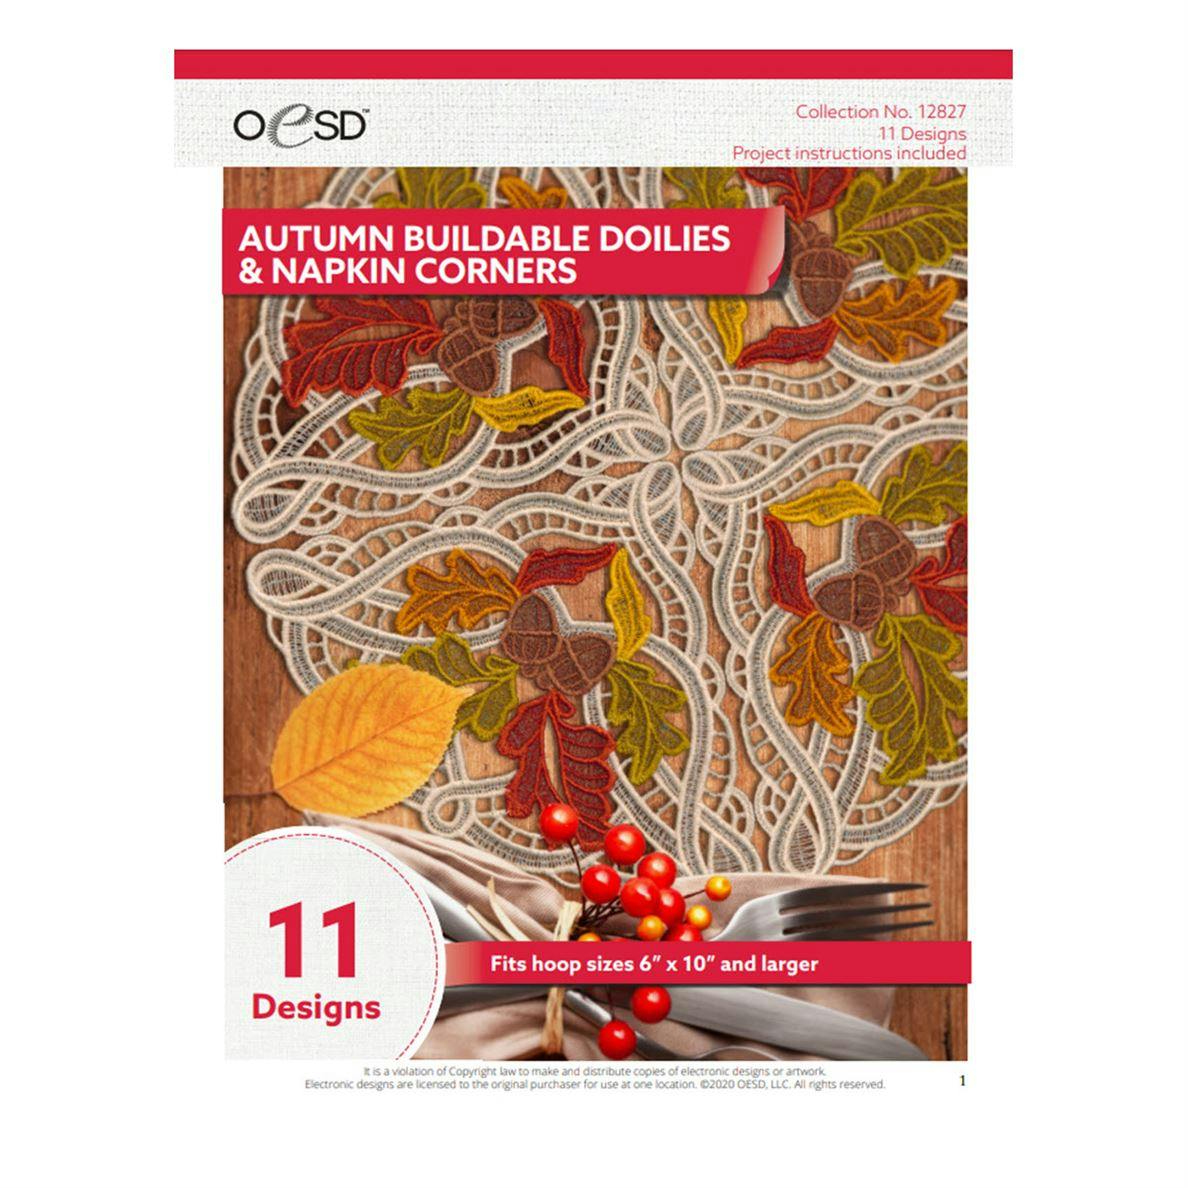 Front cover of disc for Autumn Buildable Doilies & Napkin Corners Collection